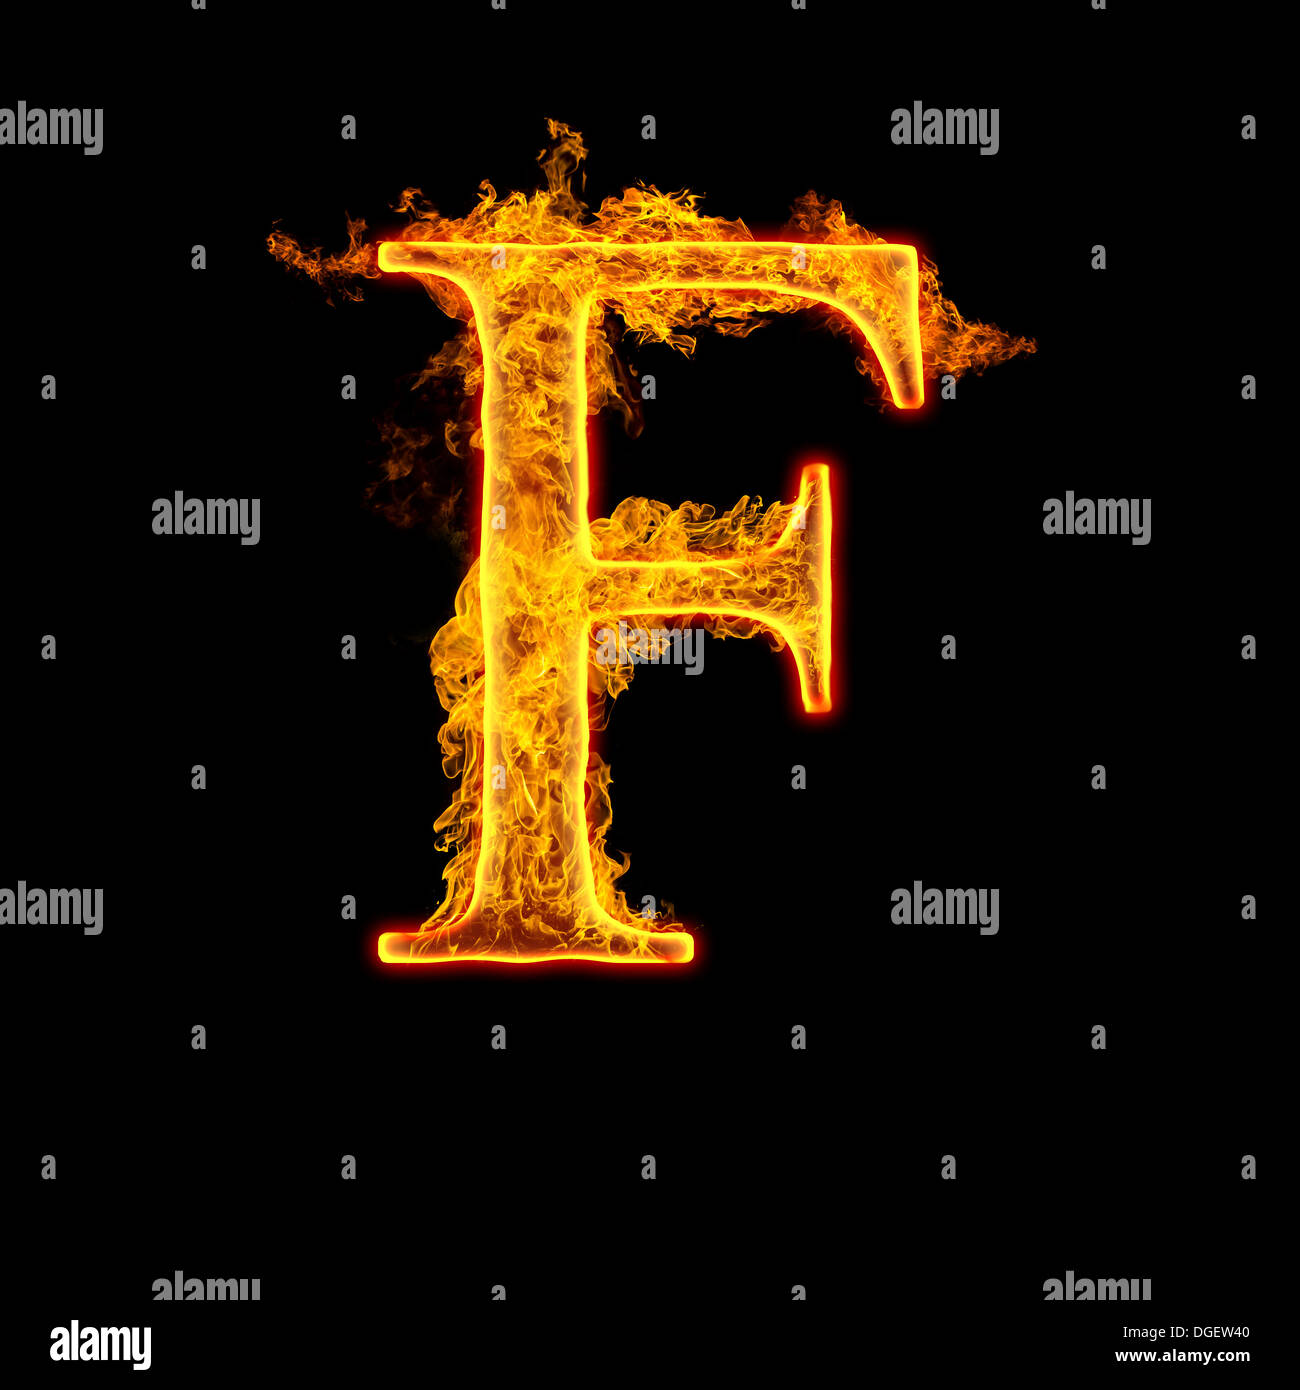 Astonishing Collection of Full 4K Images: Exploring over 999+ Images Featuring the Letter “F”